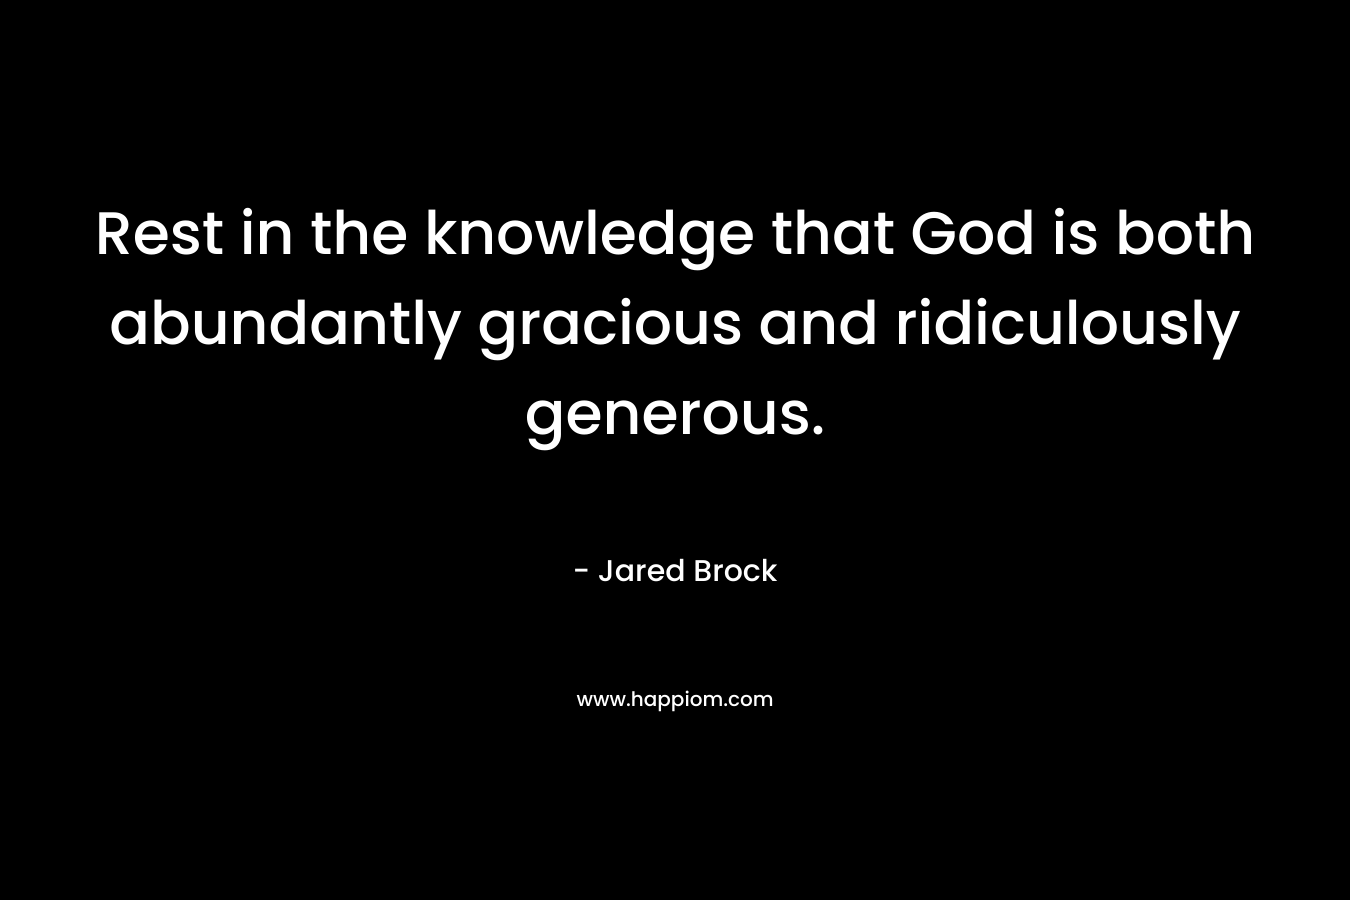 Rest in the knowledge that God is both abundantly gracious and ridiculously generous. – Jared Brock